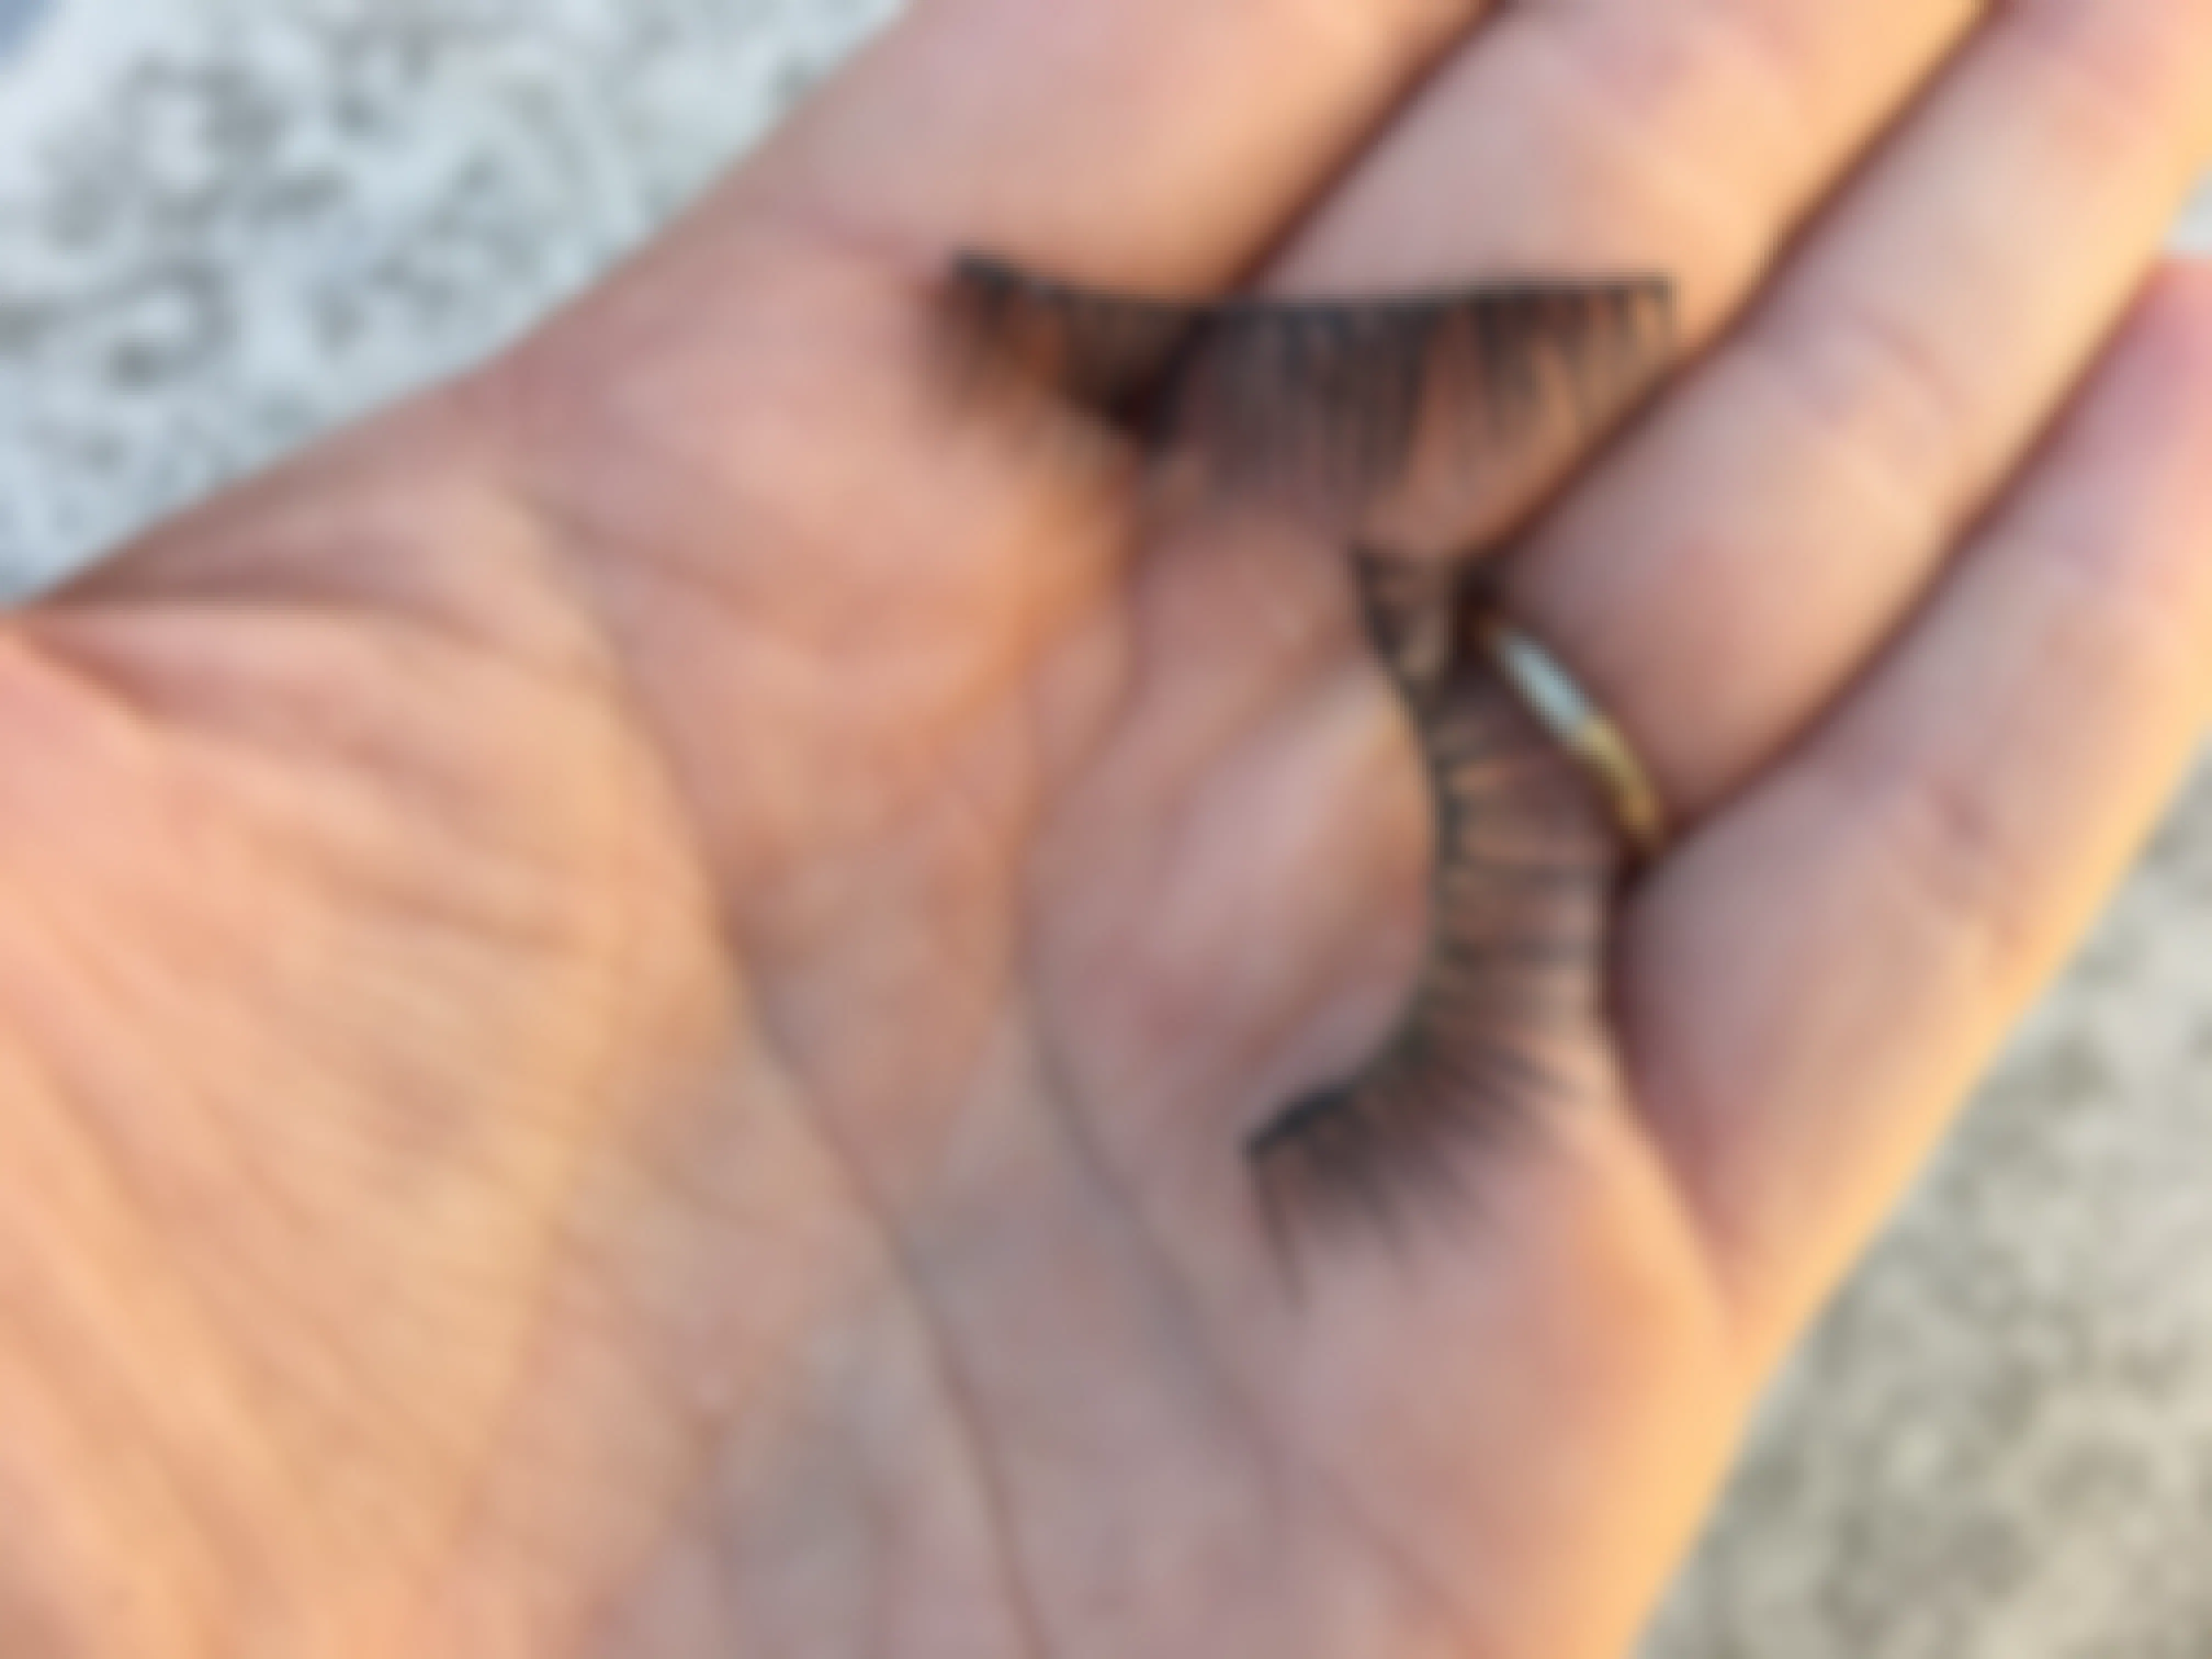 A person holding fake eyelashes in their hand.